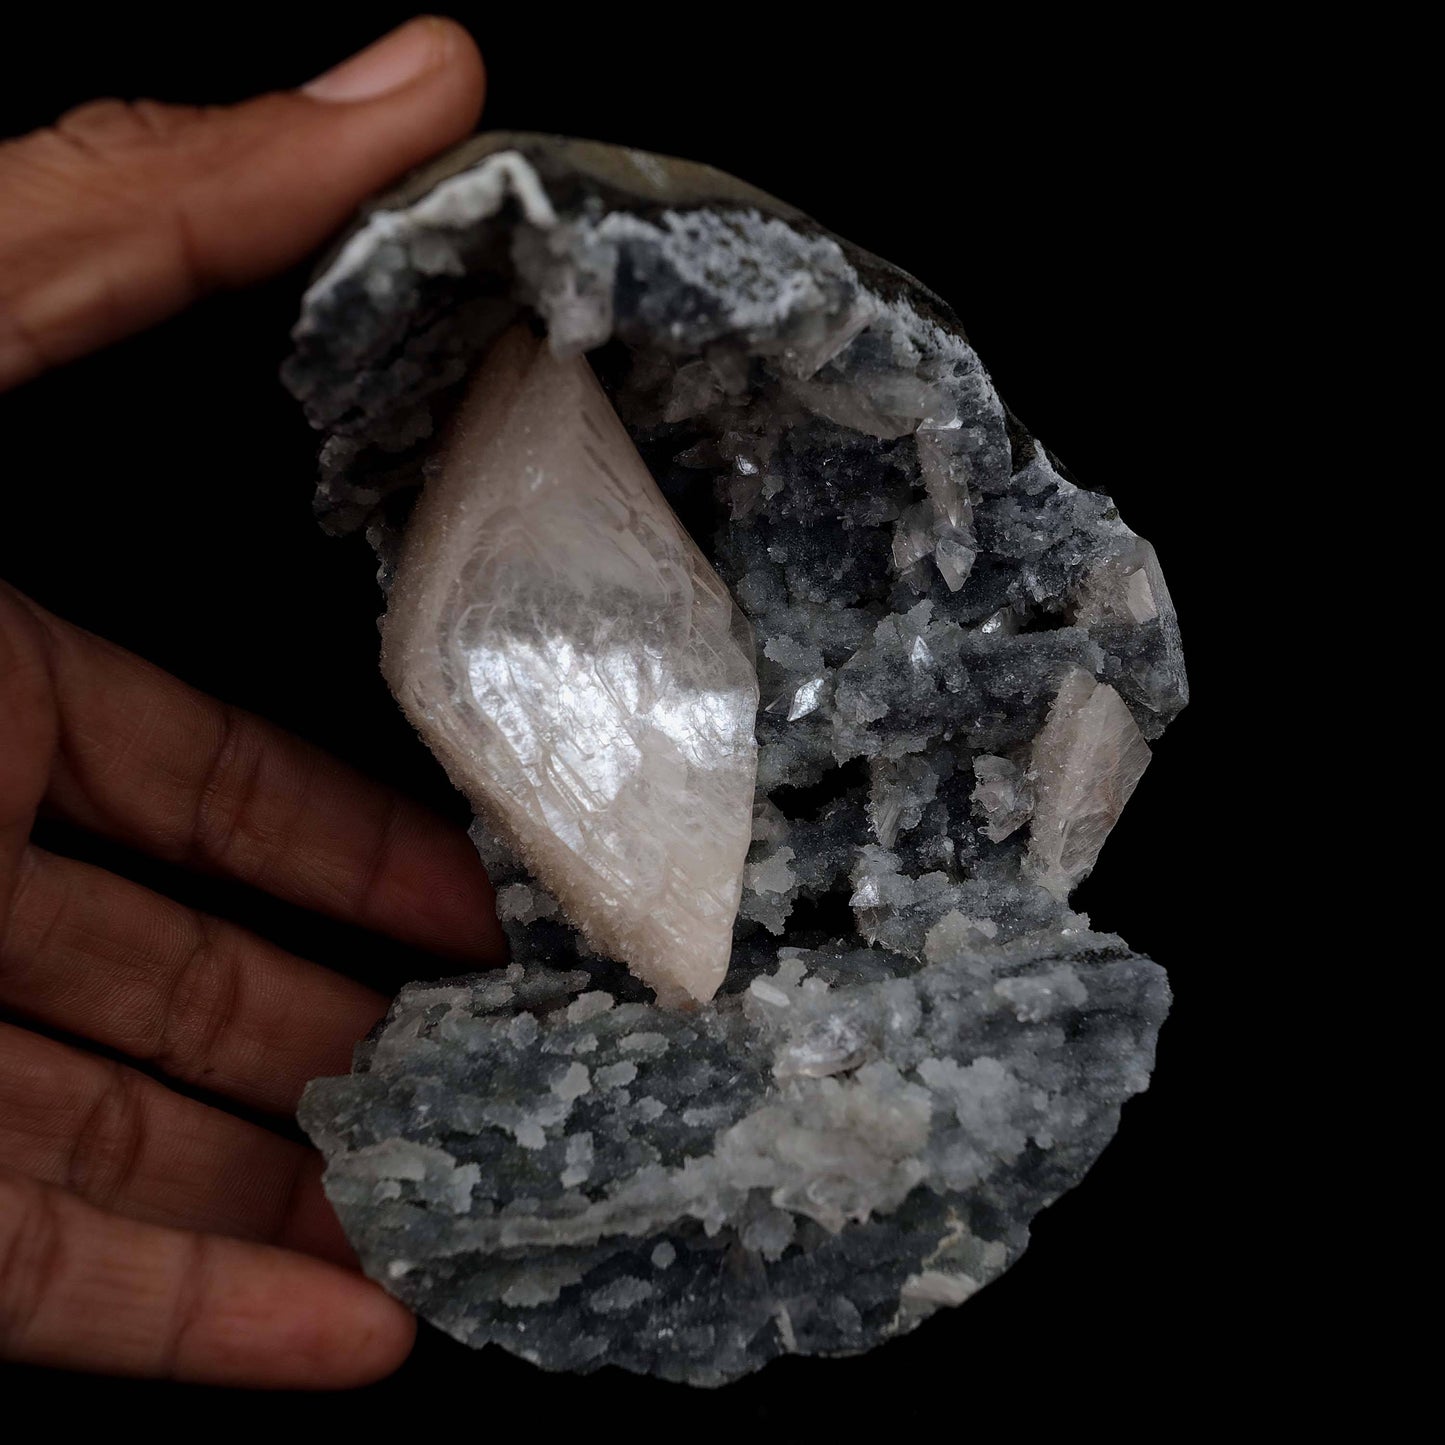 Heulandite Crystal Inside Black Chalcedony Geode Natural Mineral Speci…  https://www.superbminerals.us/products/heulandite-crystal-inside-black-chalcedony-geode-natural-mineral-specimen-b-4491  Features:A stunning wedge heulandite crystal is forcefully placed in a sculptural, well-prepared basalt vug bordered with a sharply contrasting sparkling grey drusy chalcedony.The magnificent glassy, iridescent, transparent parallel-growth bladed heulandite has a lovely rich coral-pink hue with unique curving 